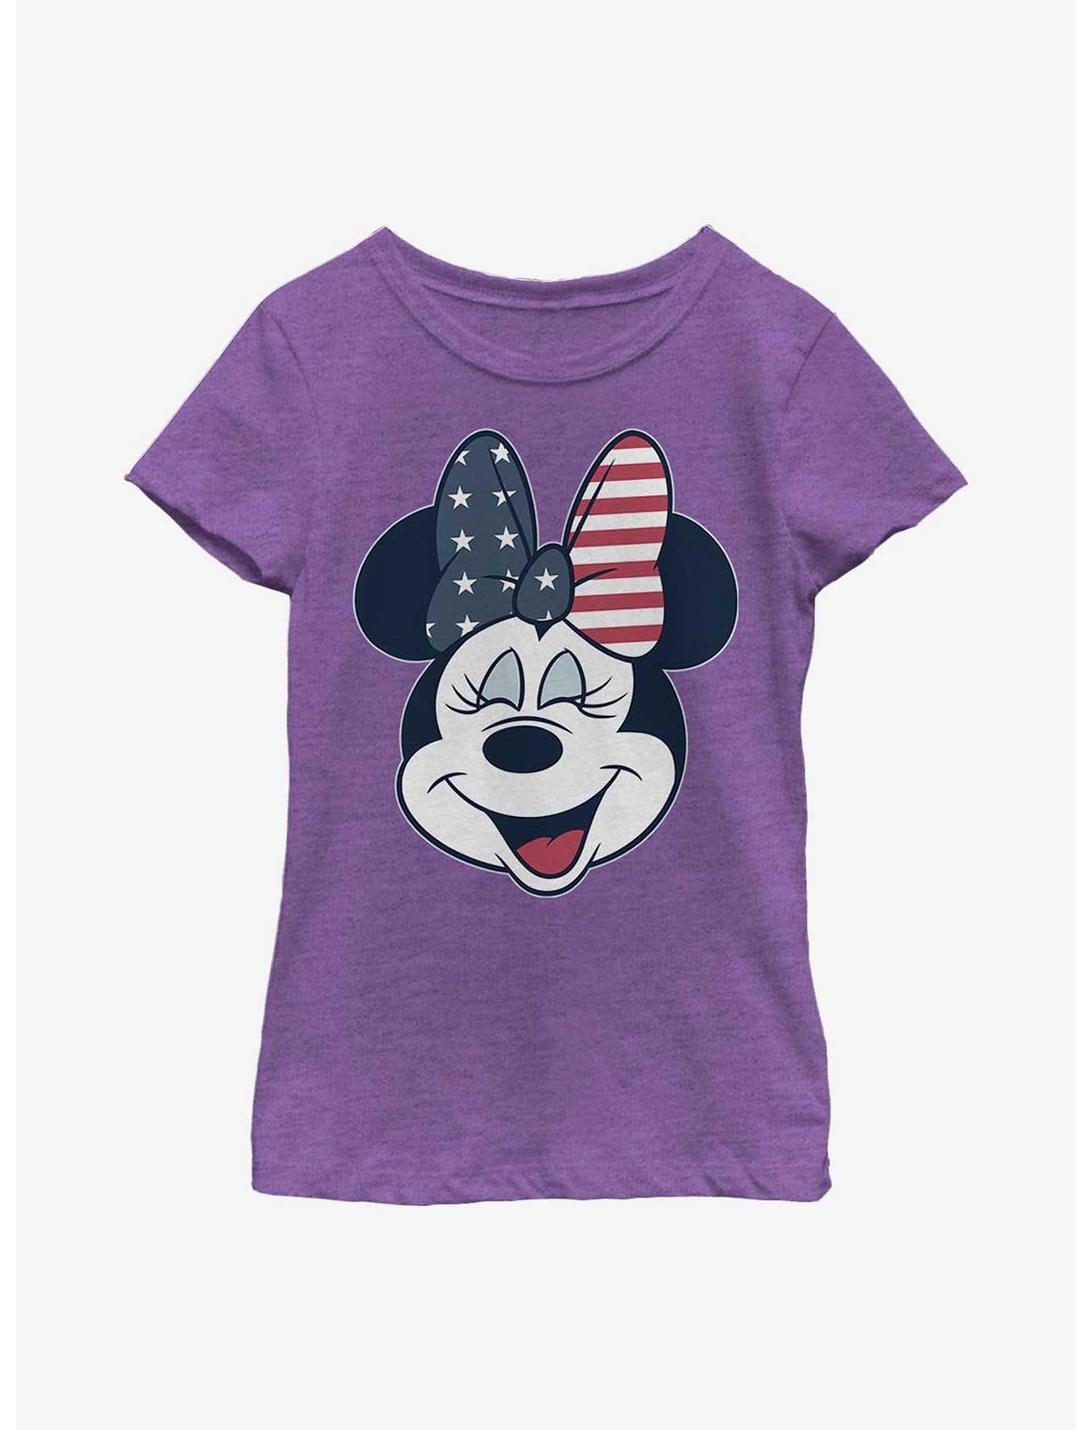 Disney Minnie Mouse American Bow Youth Girls T-Shirt, PURPLE BERRY, hi-res